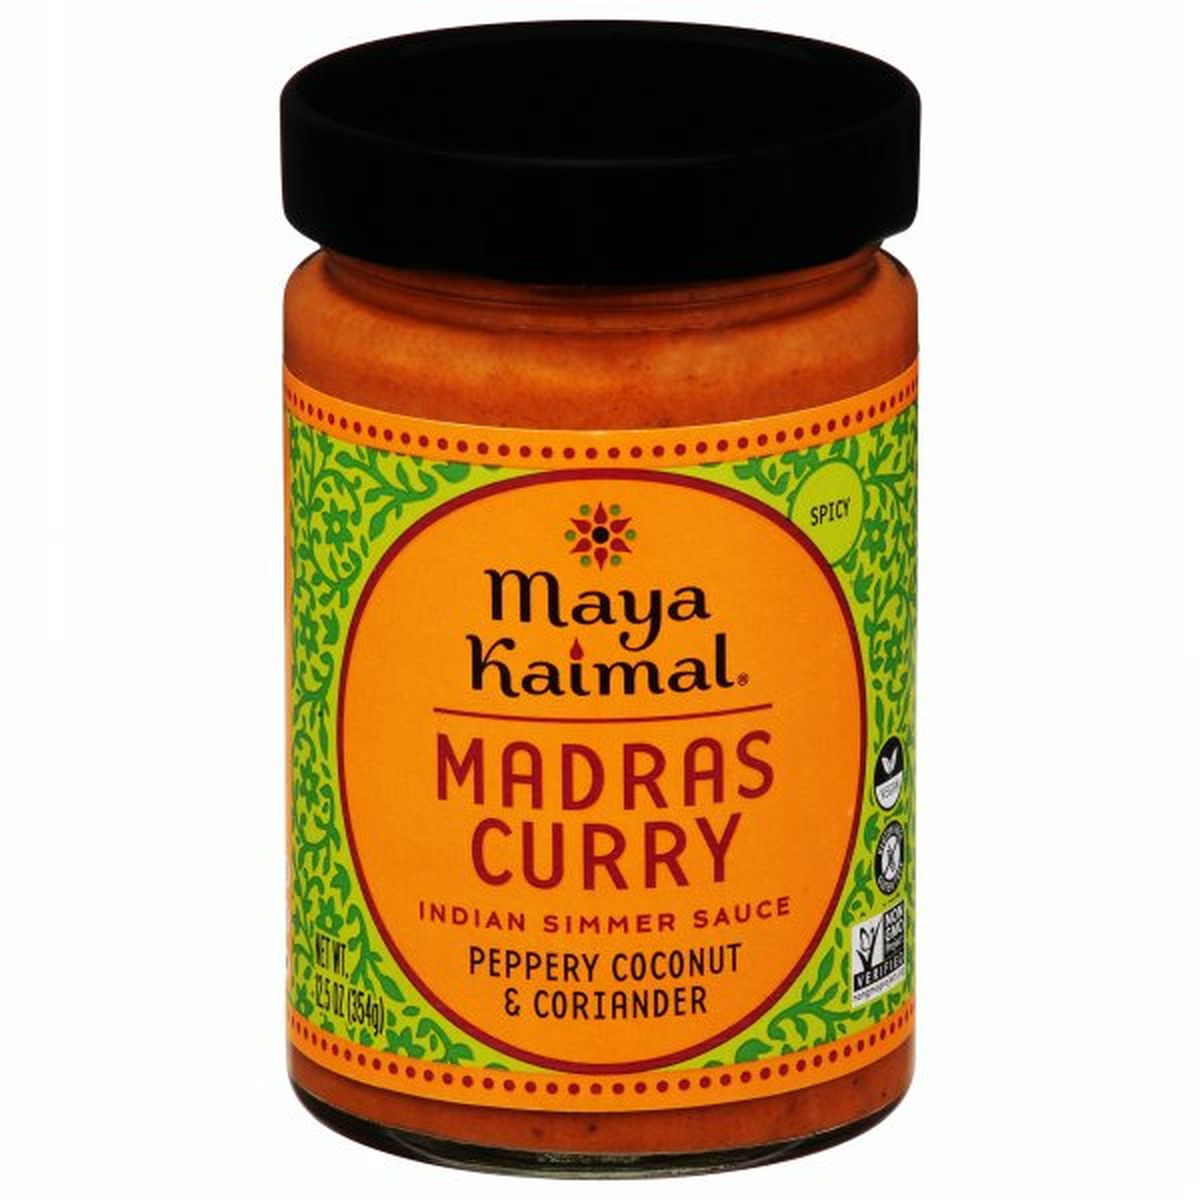 Calories in Maya Kaimal Indian Simmer Sauce, Madras Curry, Spicy